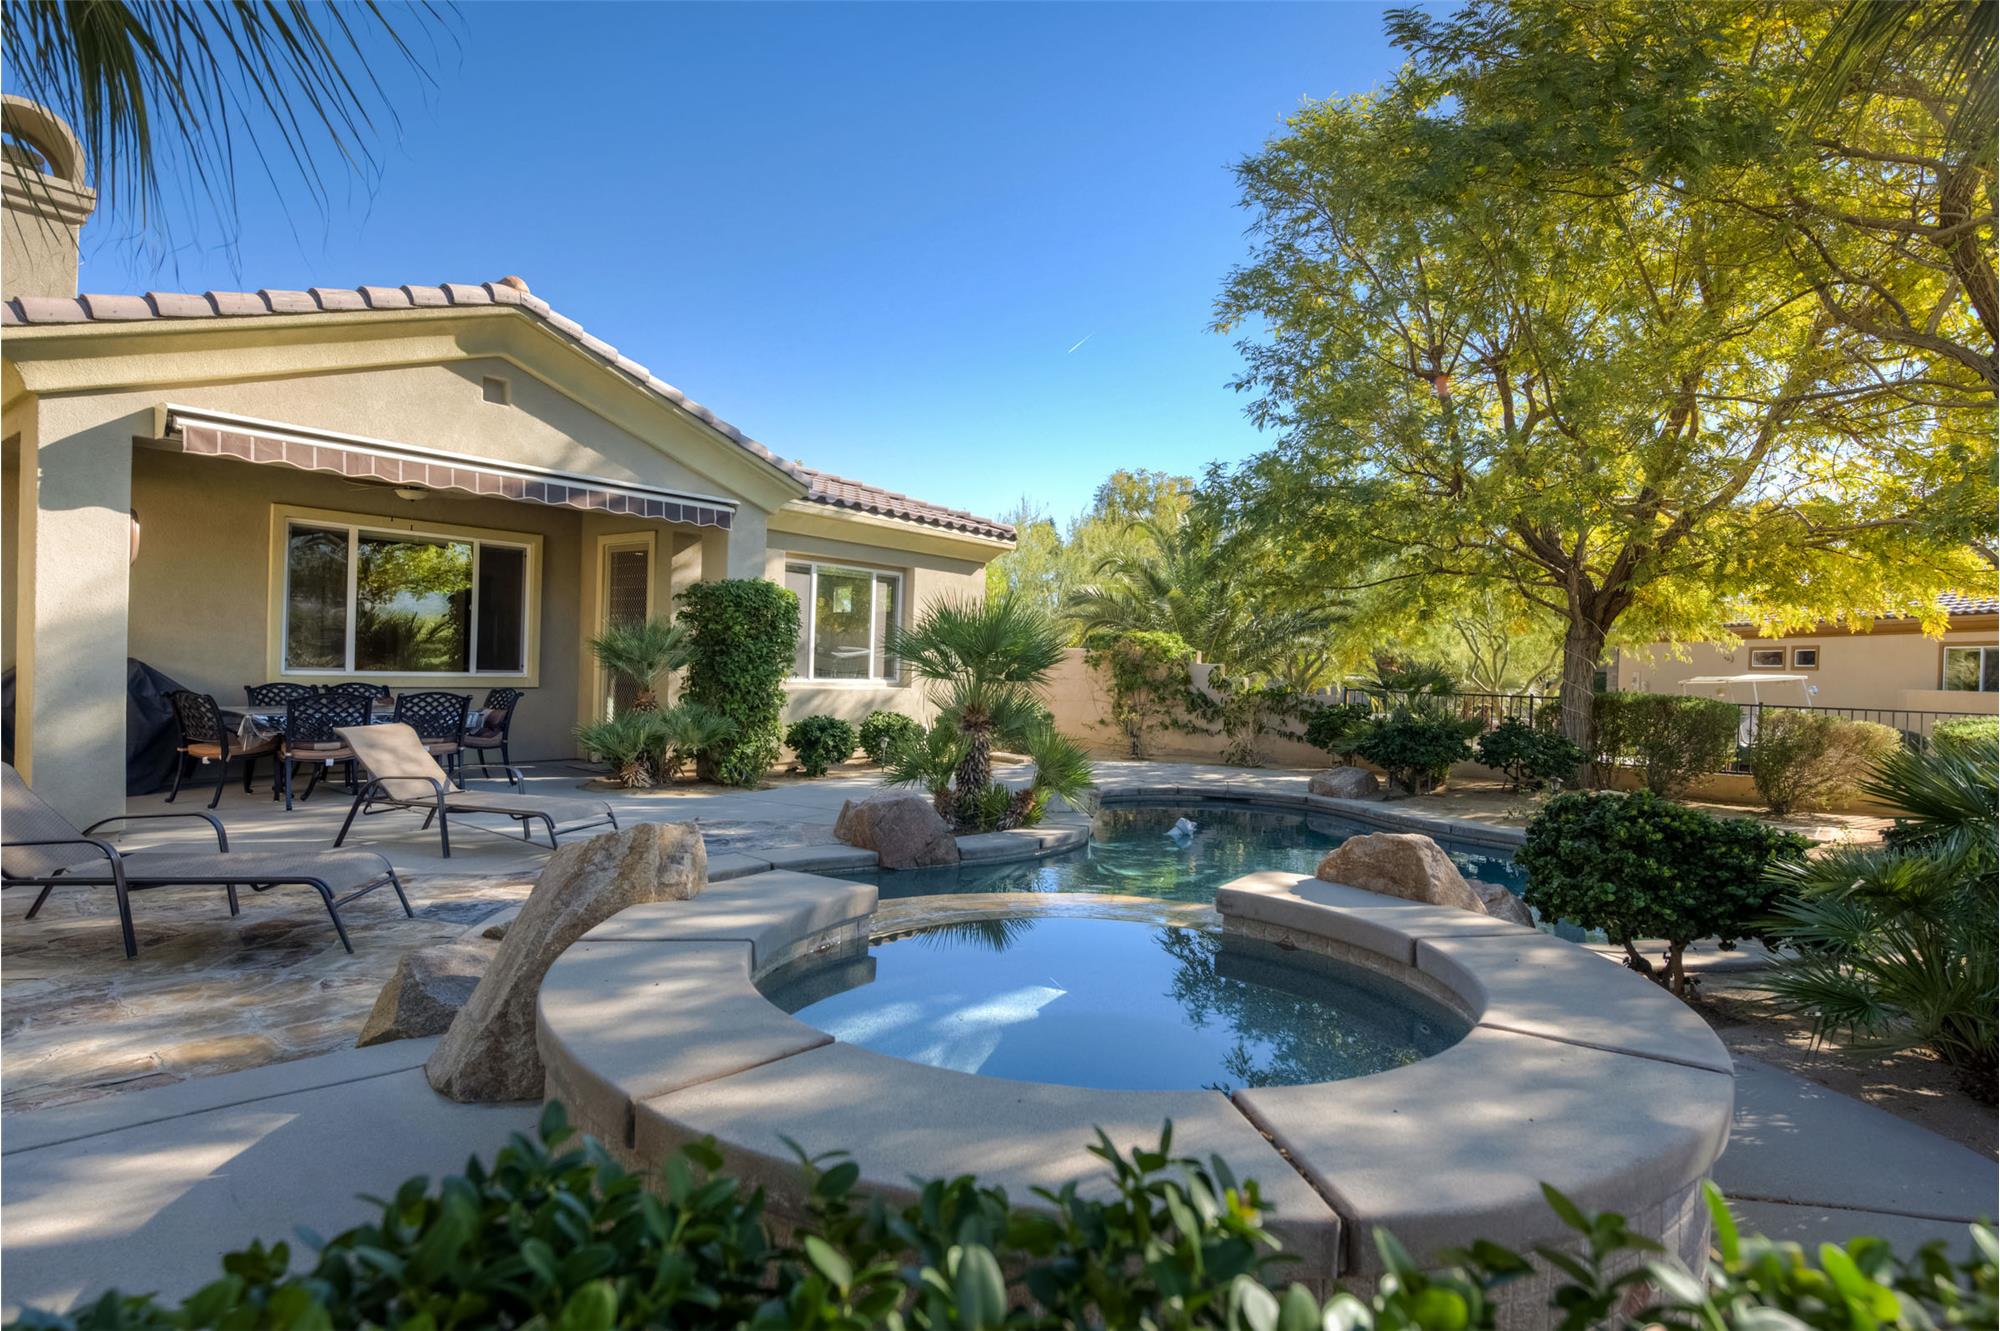 Homes For Sale Palm Springs Real Estate